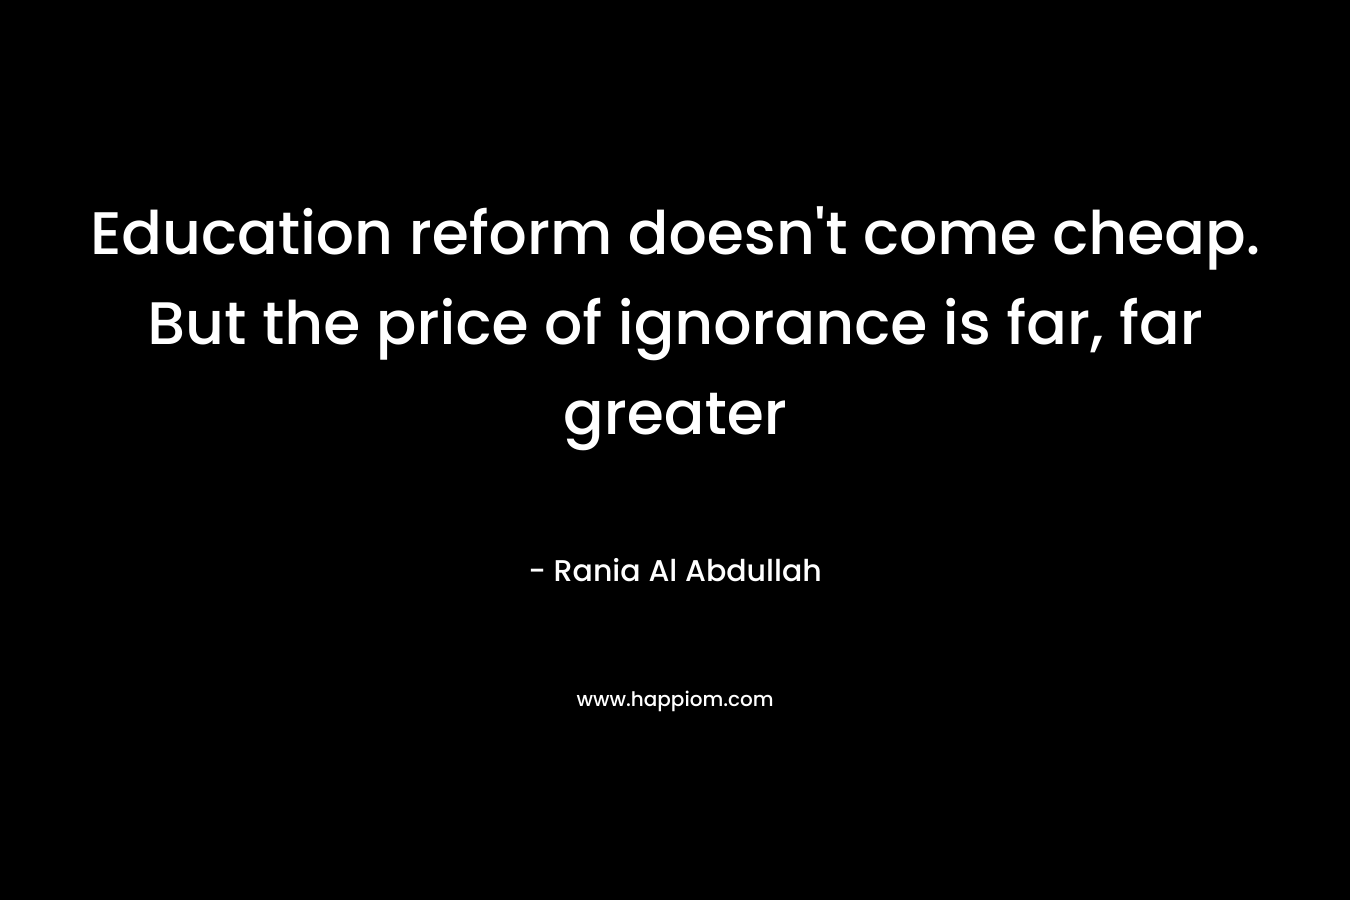 Education reform doesn’t come cheap. But the price of ignorance is far, far greater – Rania Al Abdullah